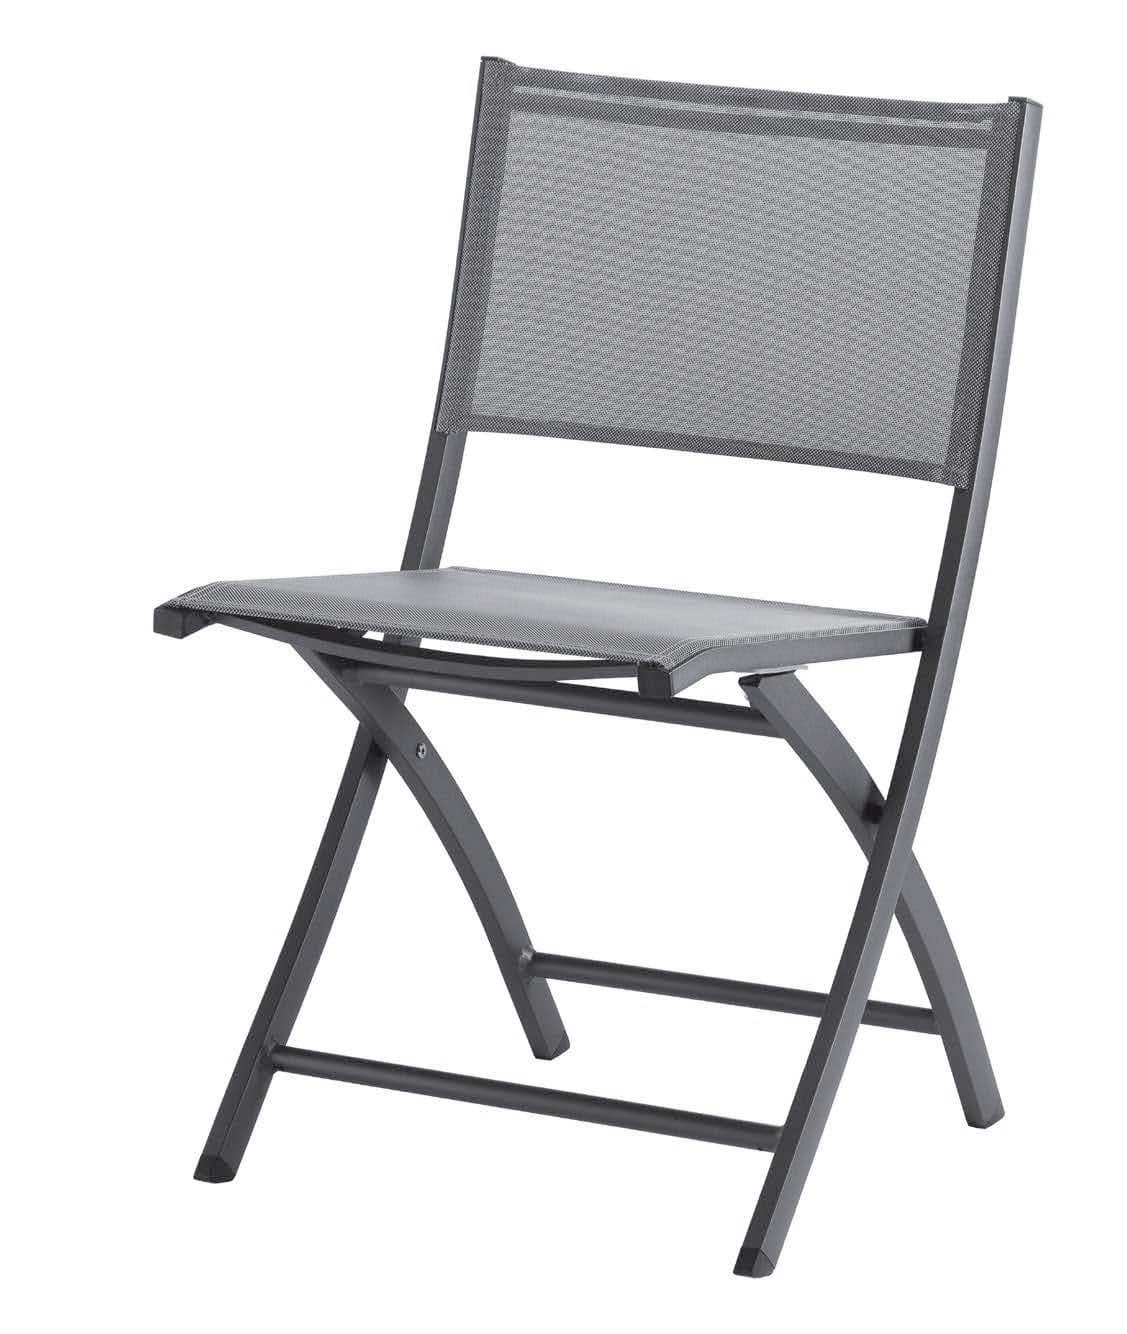 SE 468, Folding chair in aluminum and textilene, for outdoor